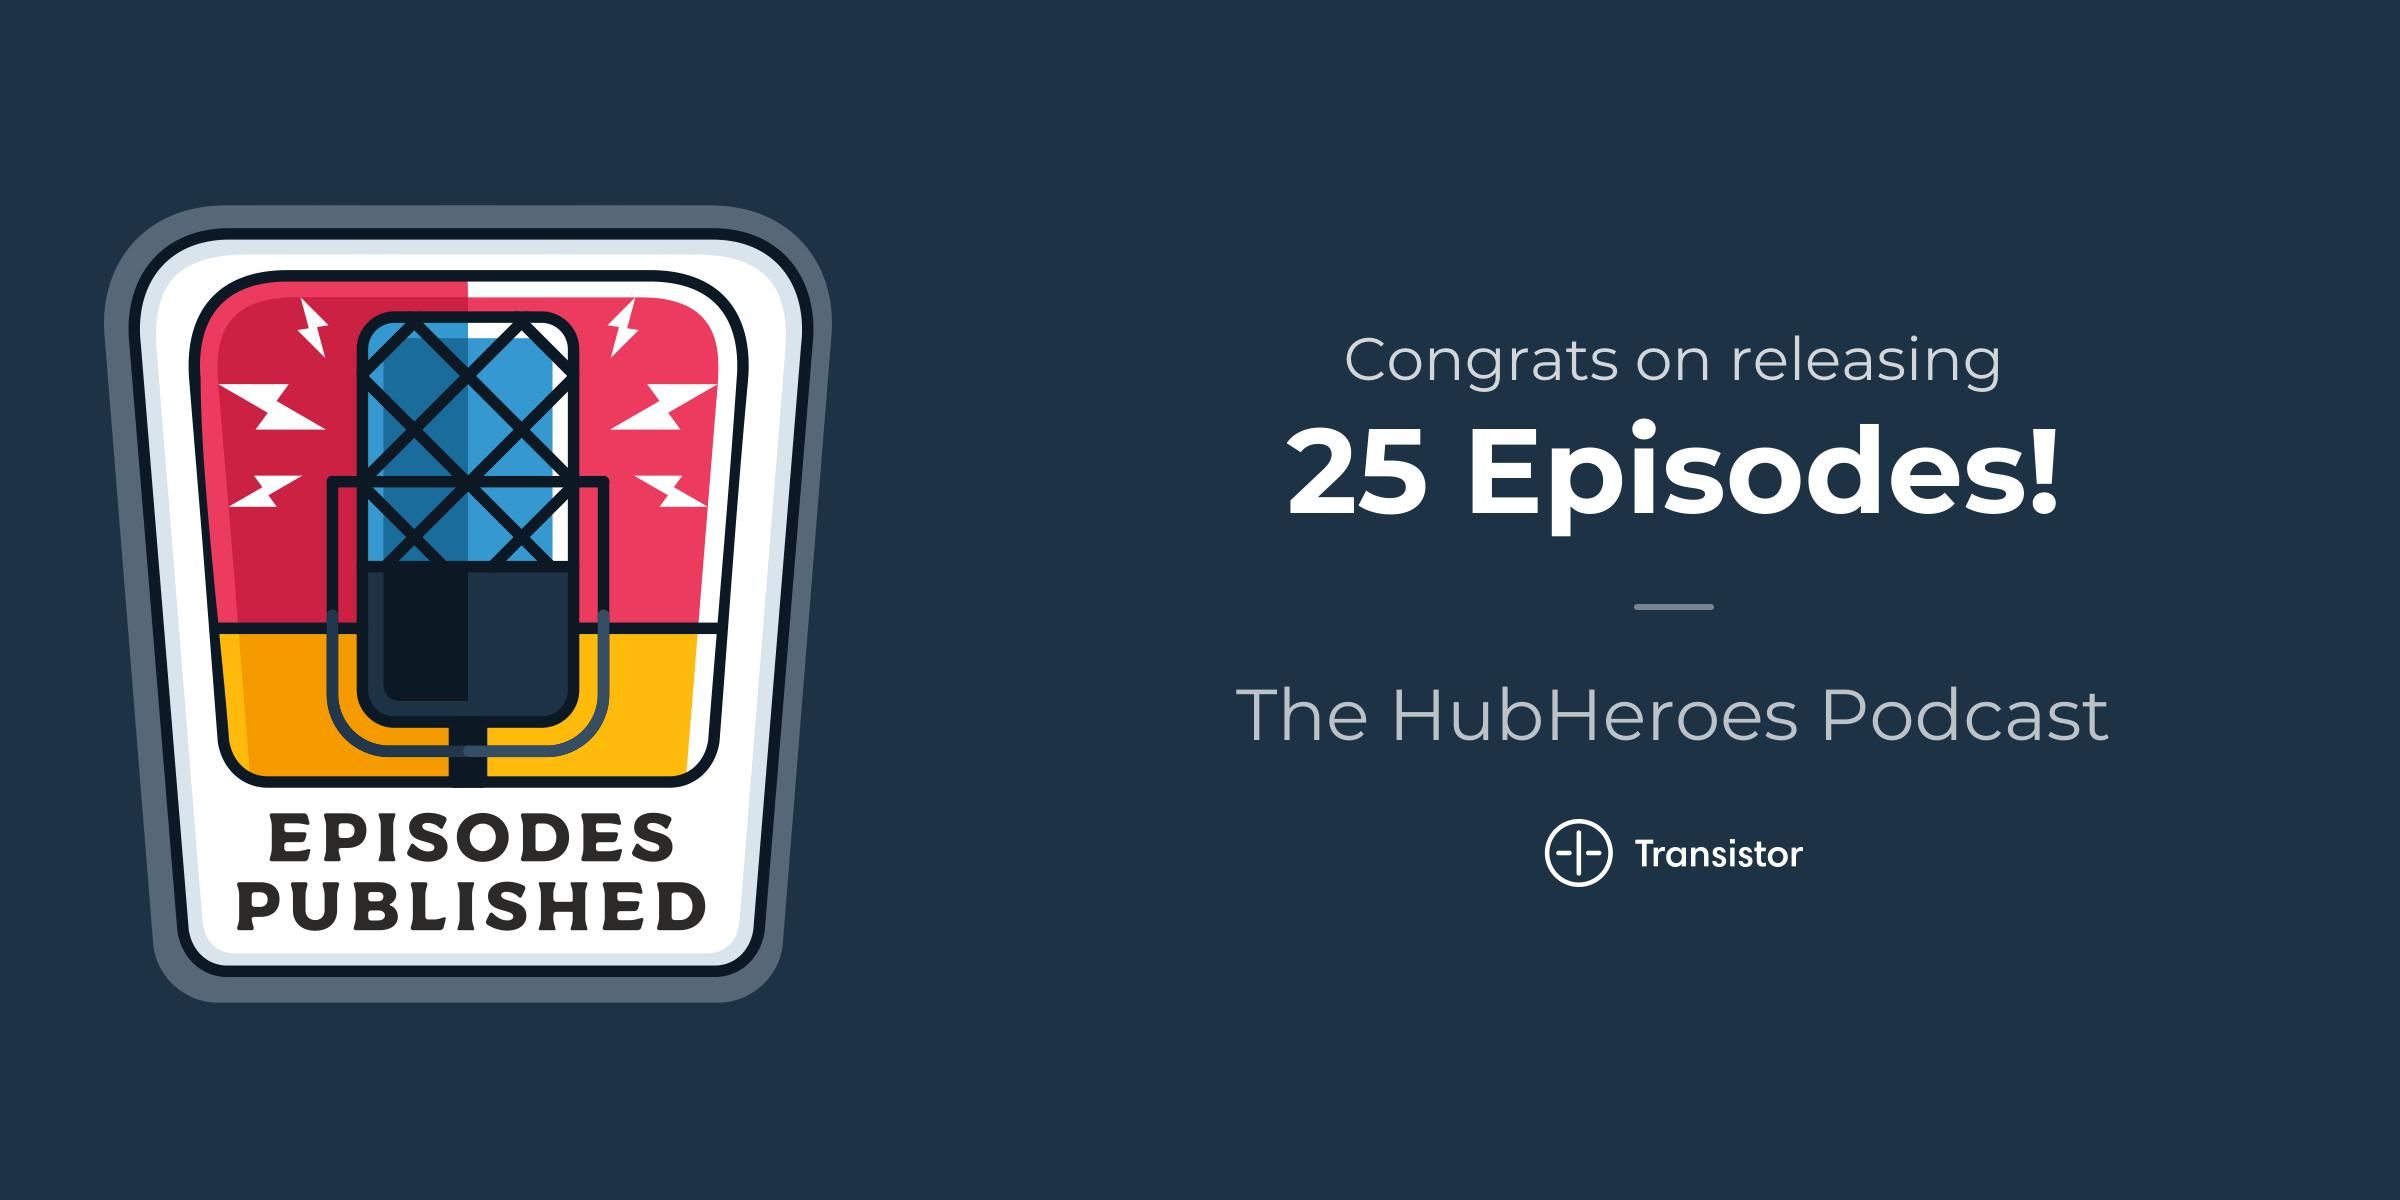 the-hubheroes-podcast-episodes_published-25